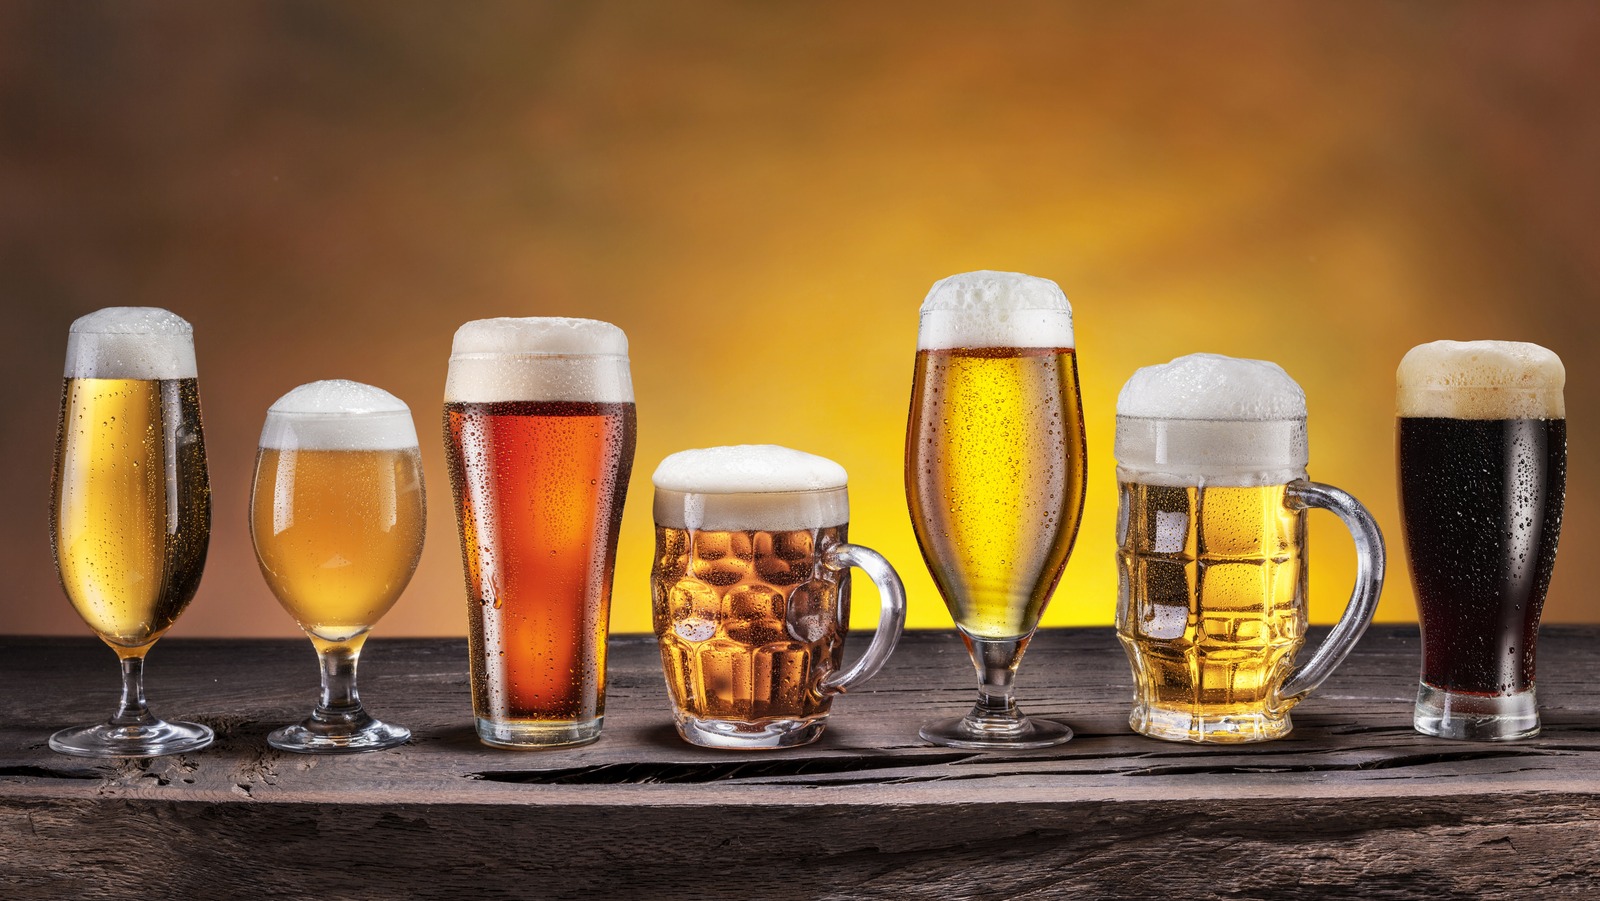 https://www.chowhound.com/img/gallery/the-role-of-your-beer-glass-is-more-important-than-you-think/l-intro-1697137116.jpg